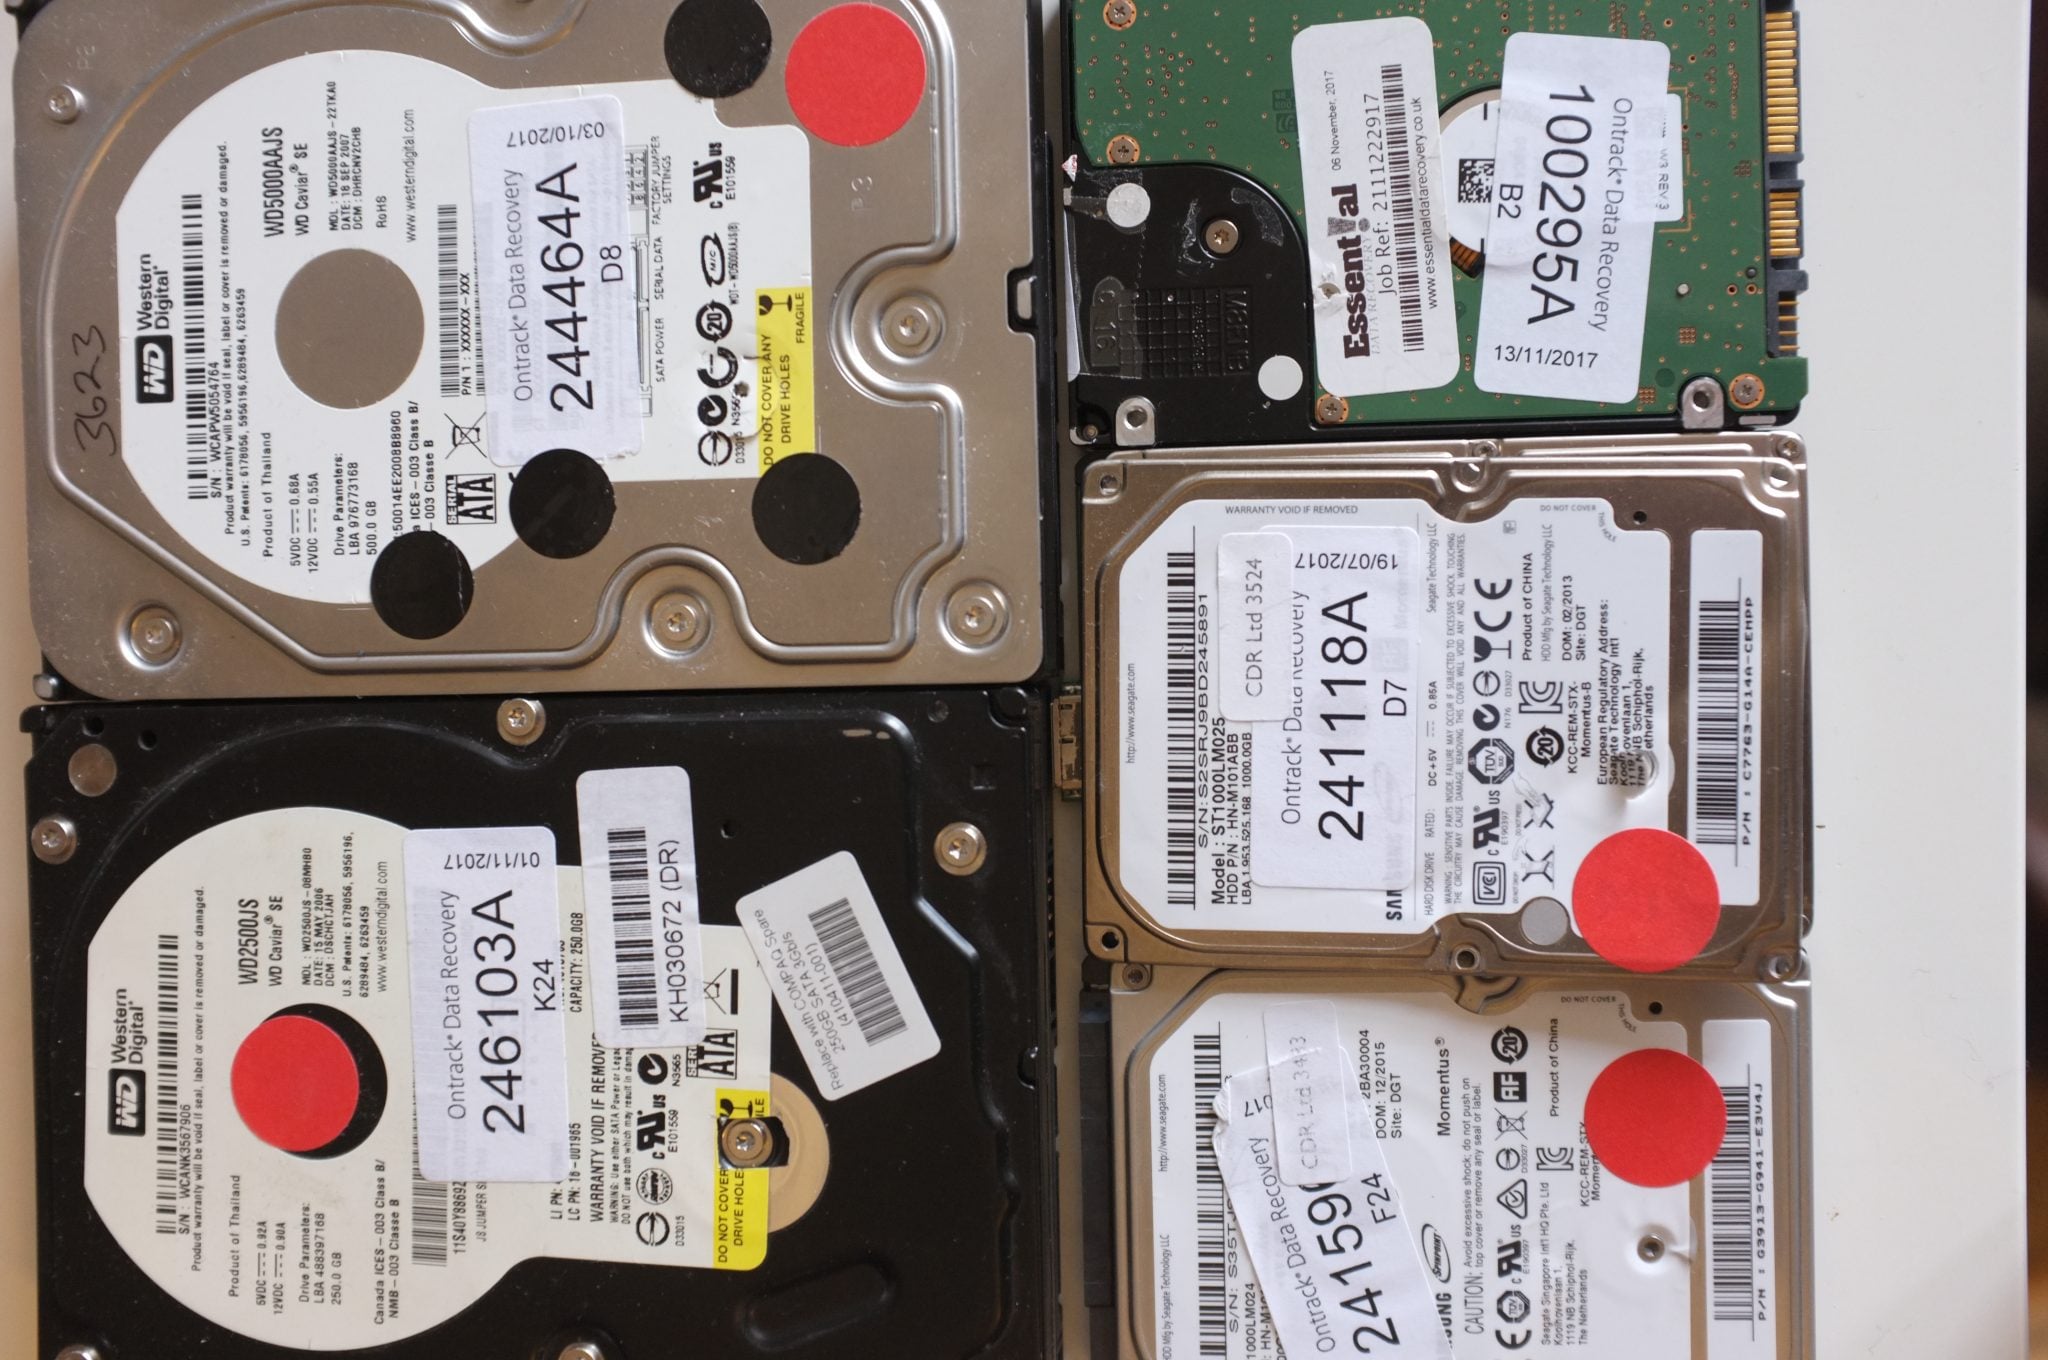 Multiple HDDs from data recovery companies